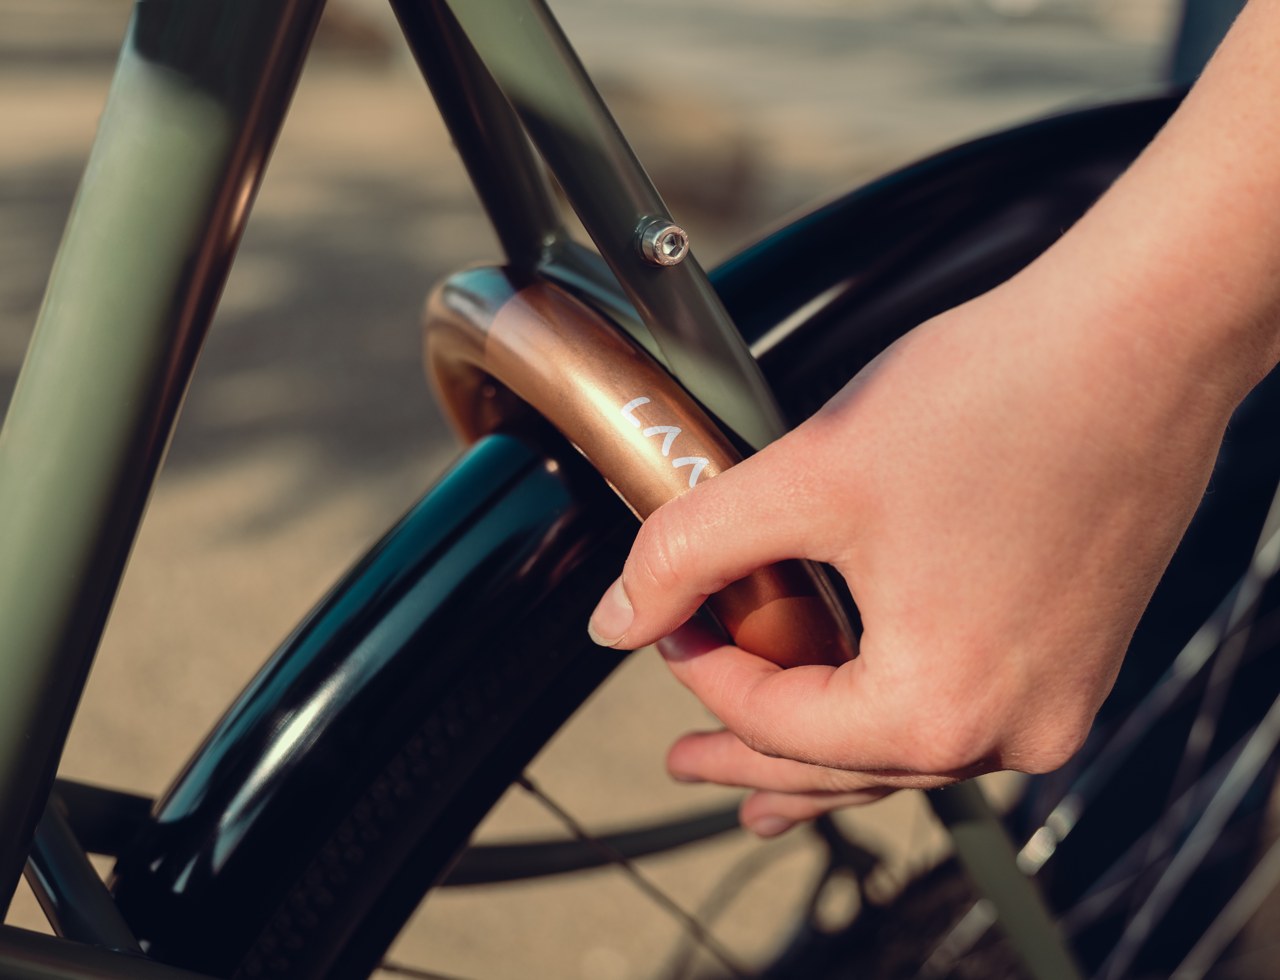 This stylish lock is the smartest and easiest way to keep your bike safe